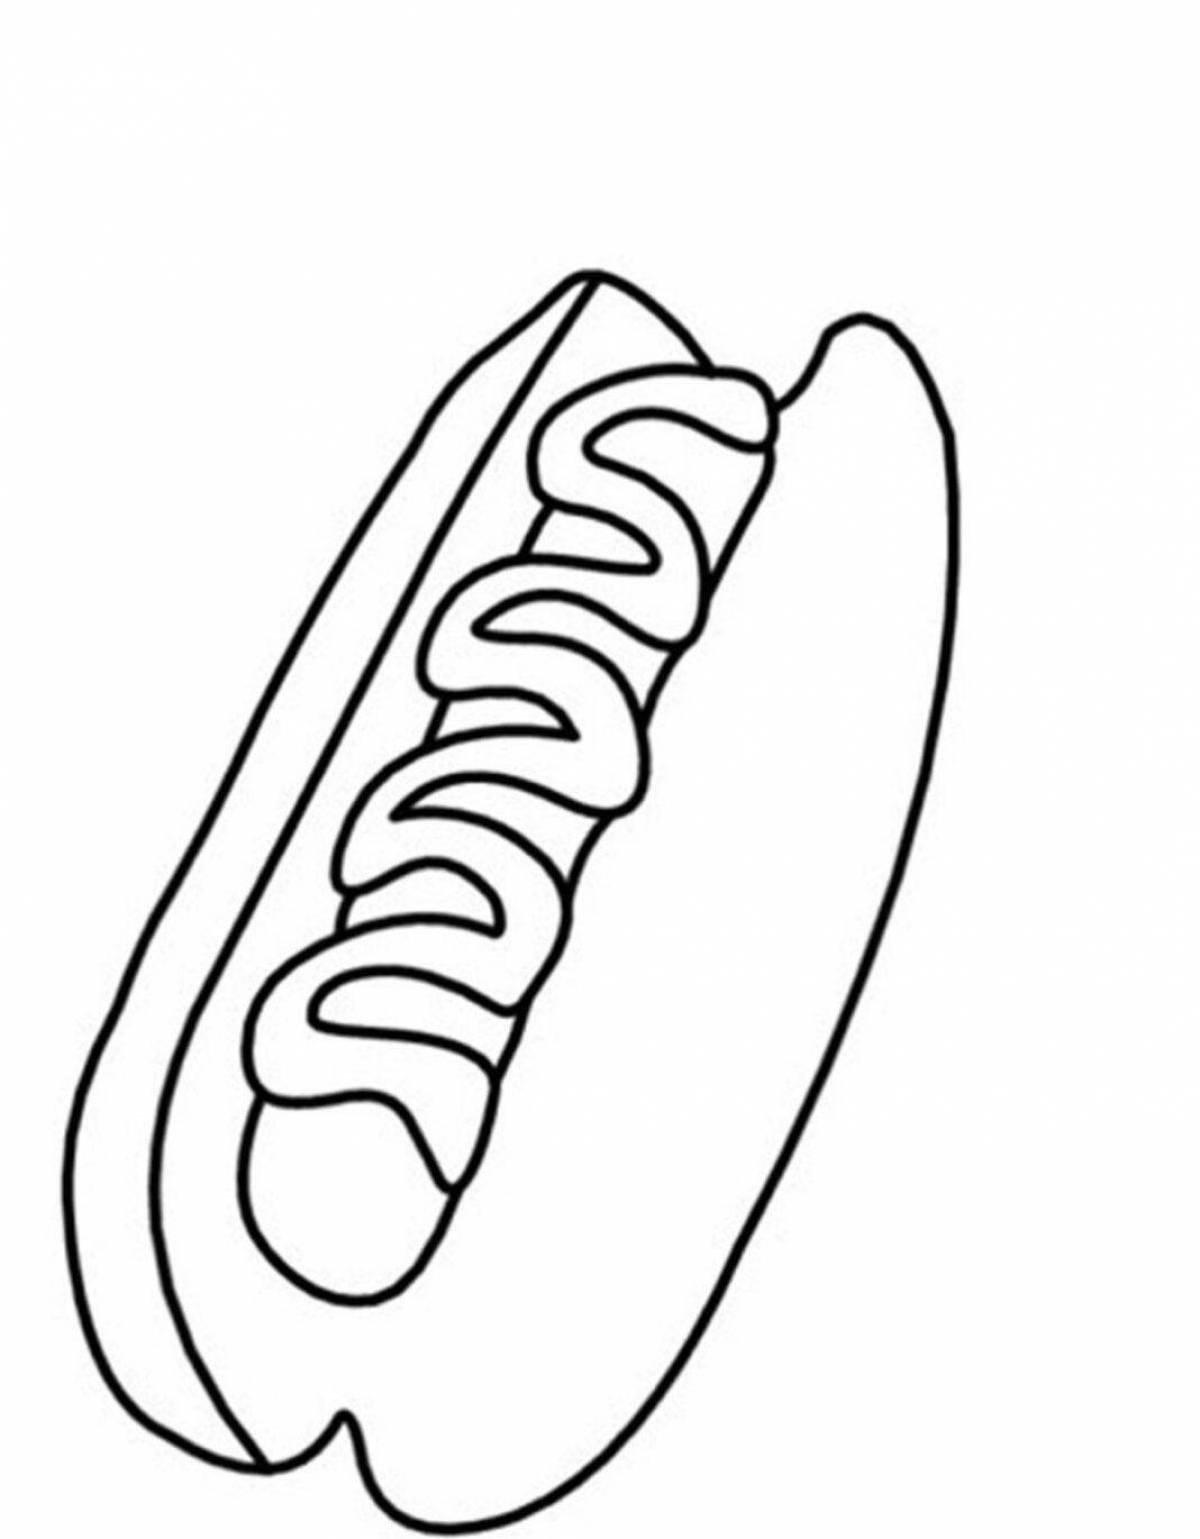 Coloring page teasing hot dog